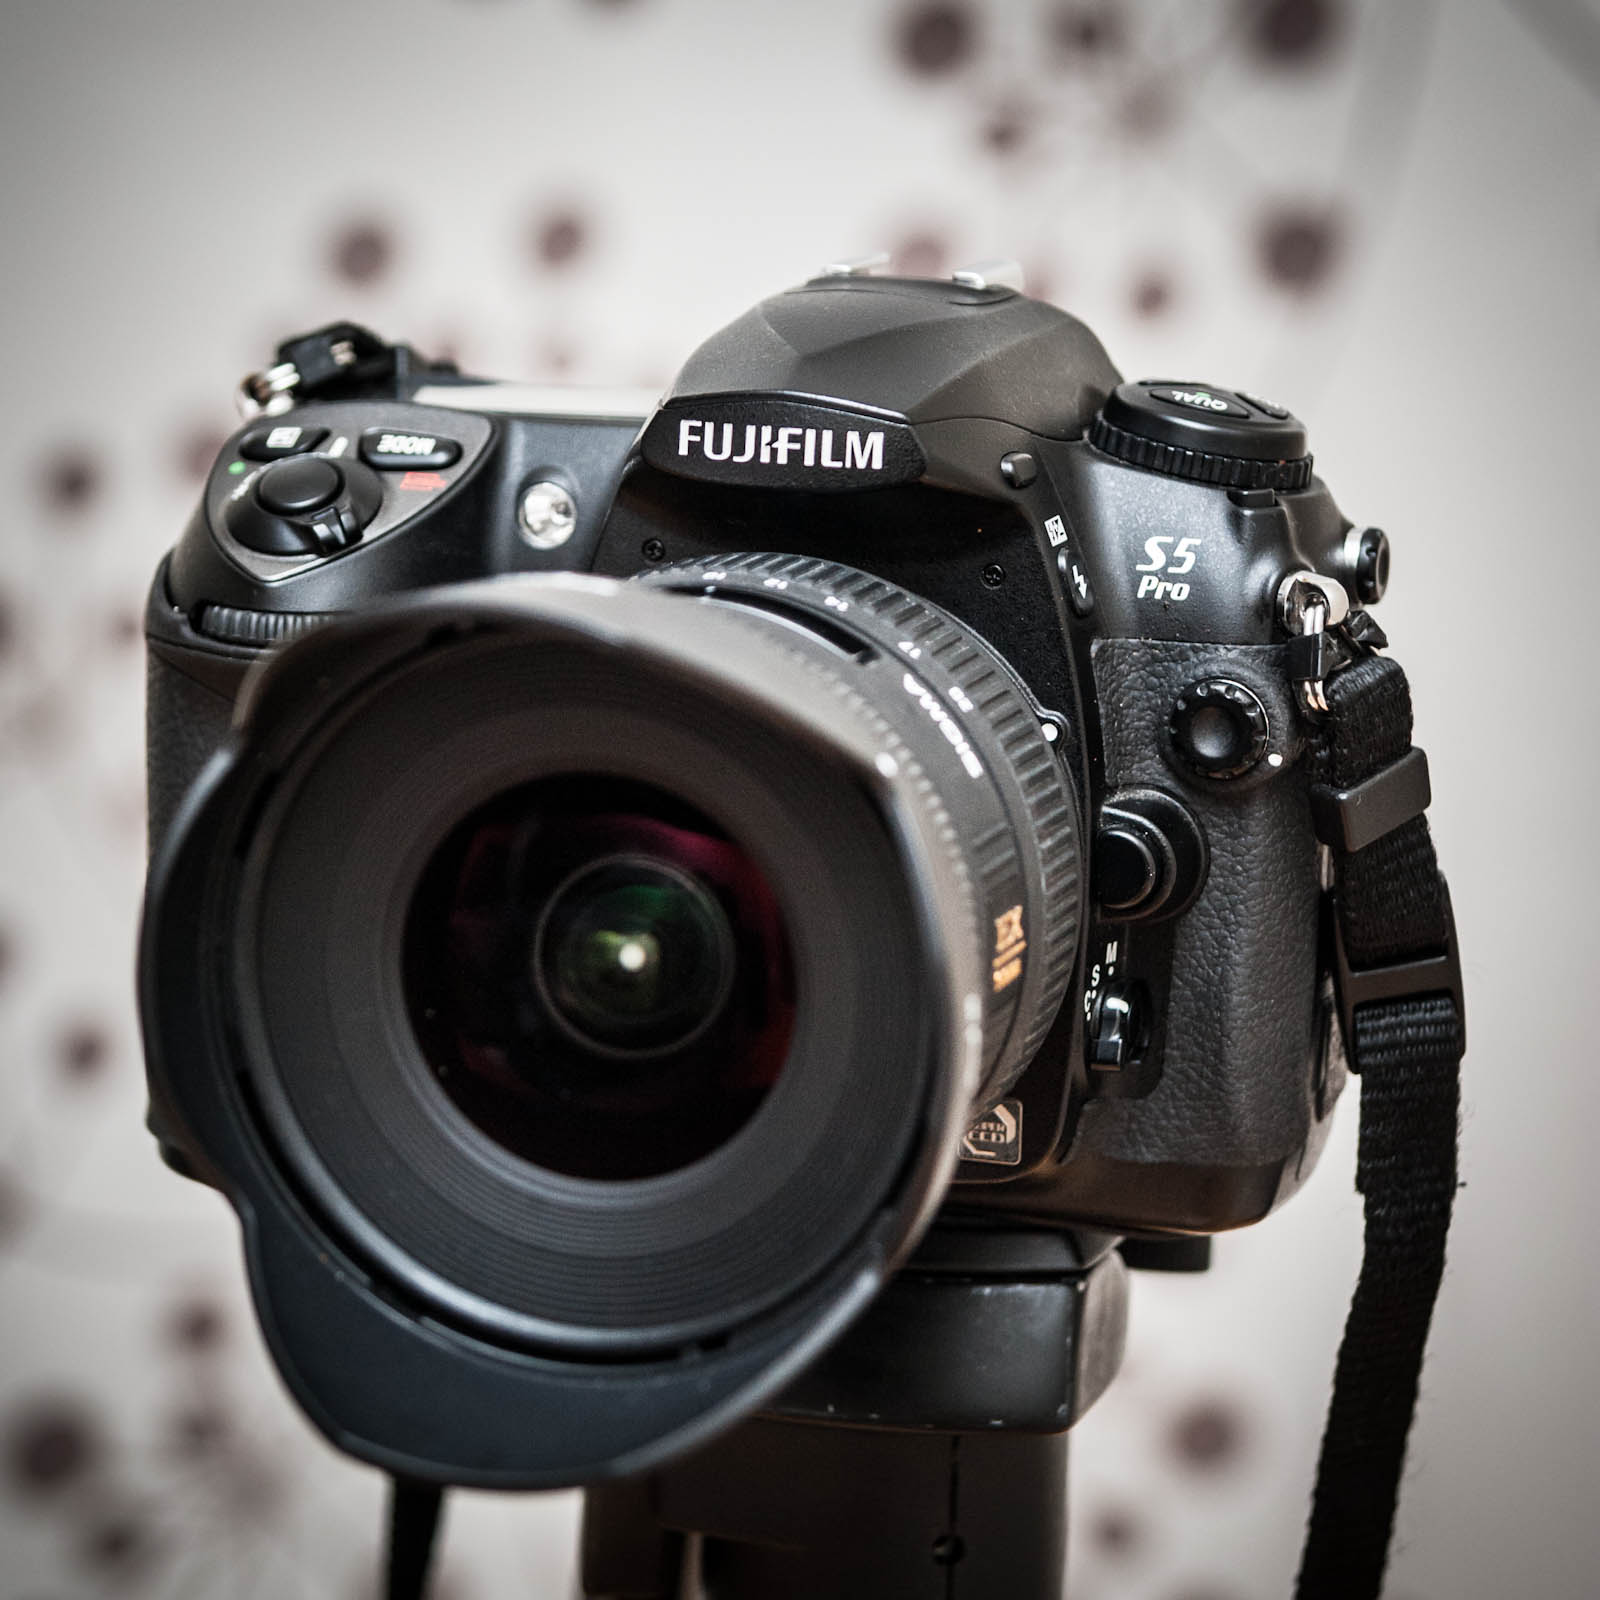 Better Family Photos: My First Crush: the Fuji S5 Pro